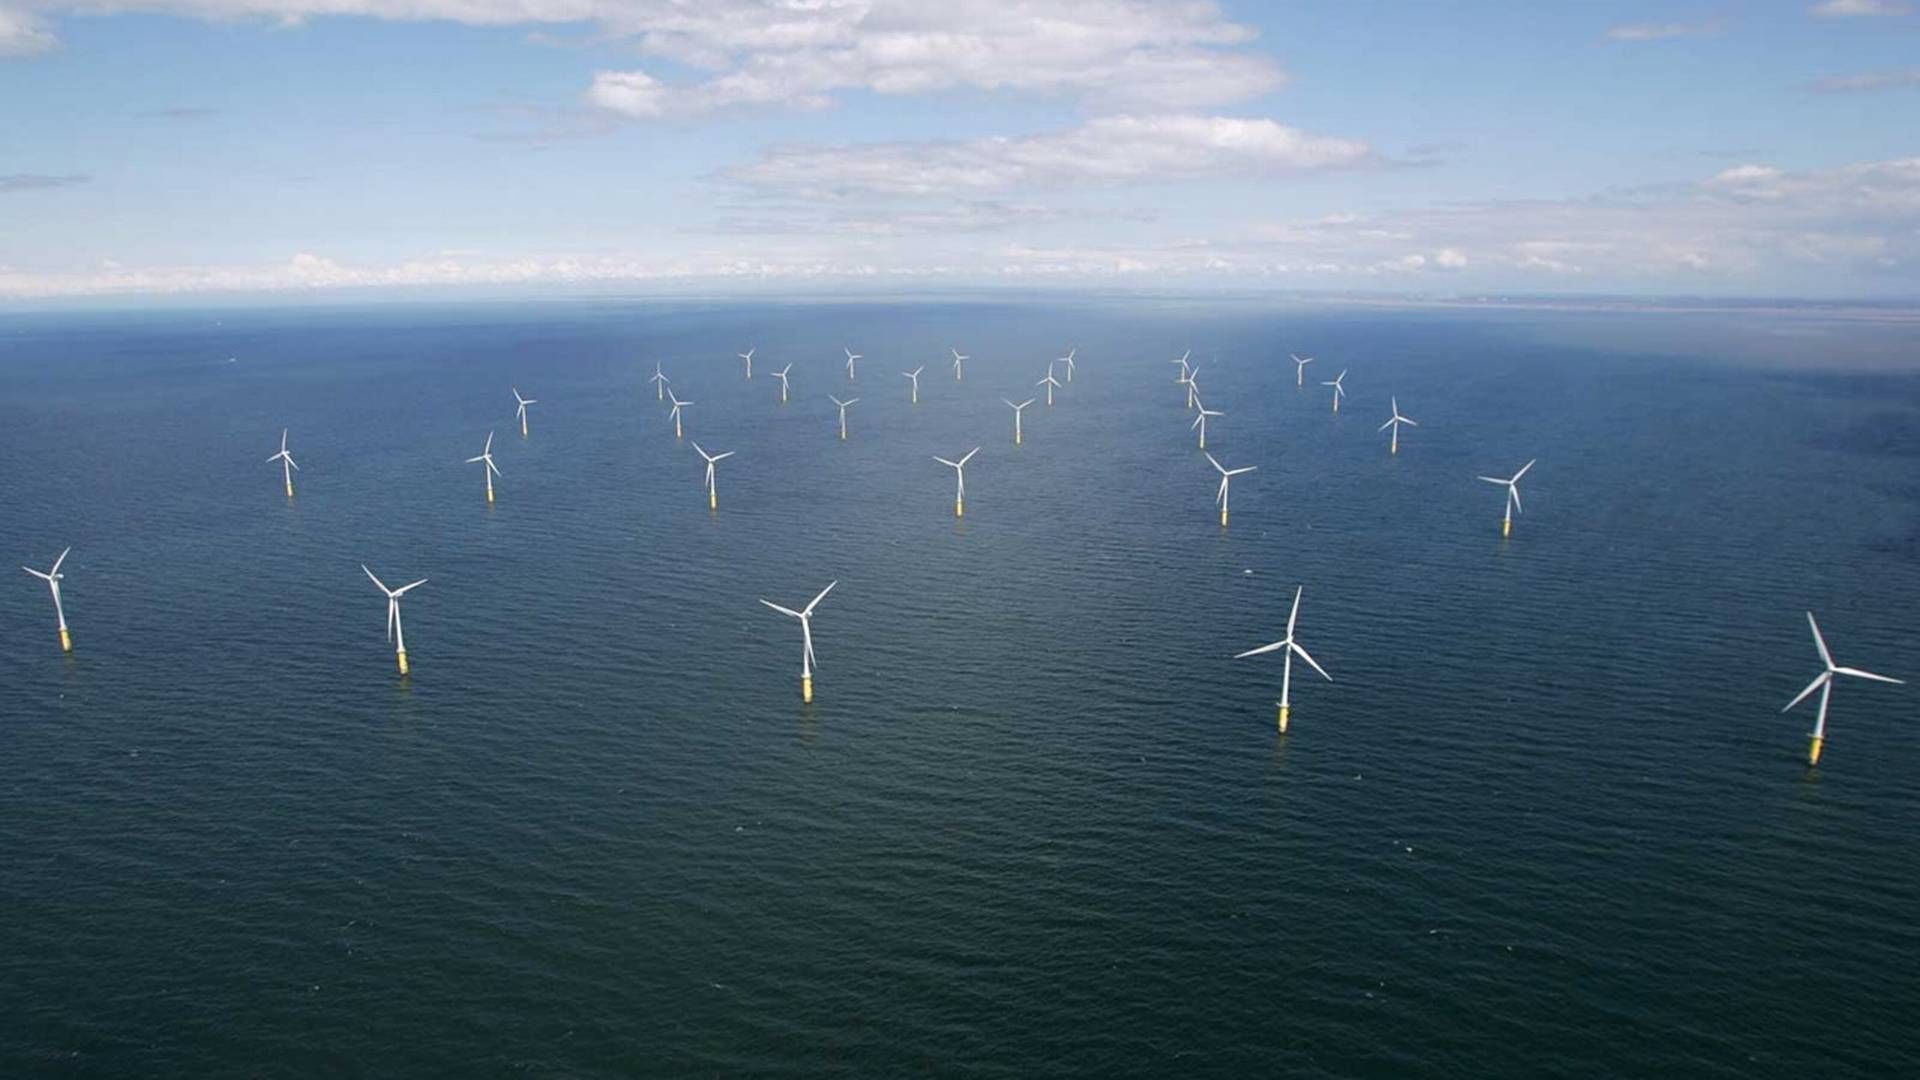 The 1-gigawatt (GW) offshore wind project will be the largest of its kind in Denmark when the wind farm is scheduled to be fully operational by the end of 2027. | Photo: Rwe